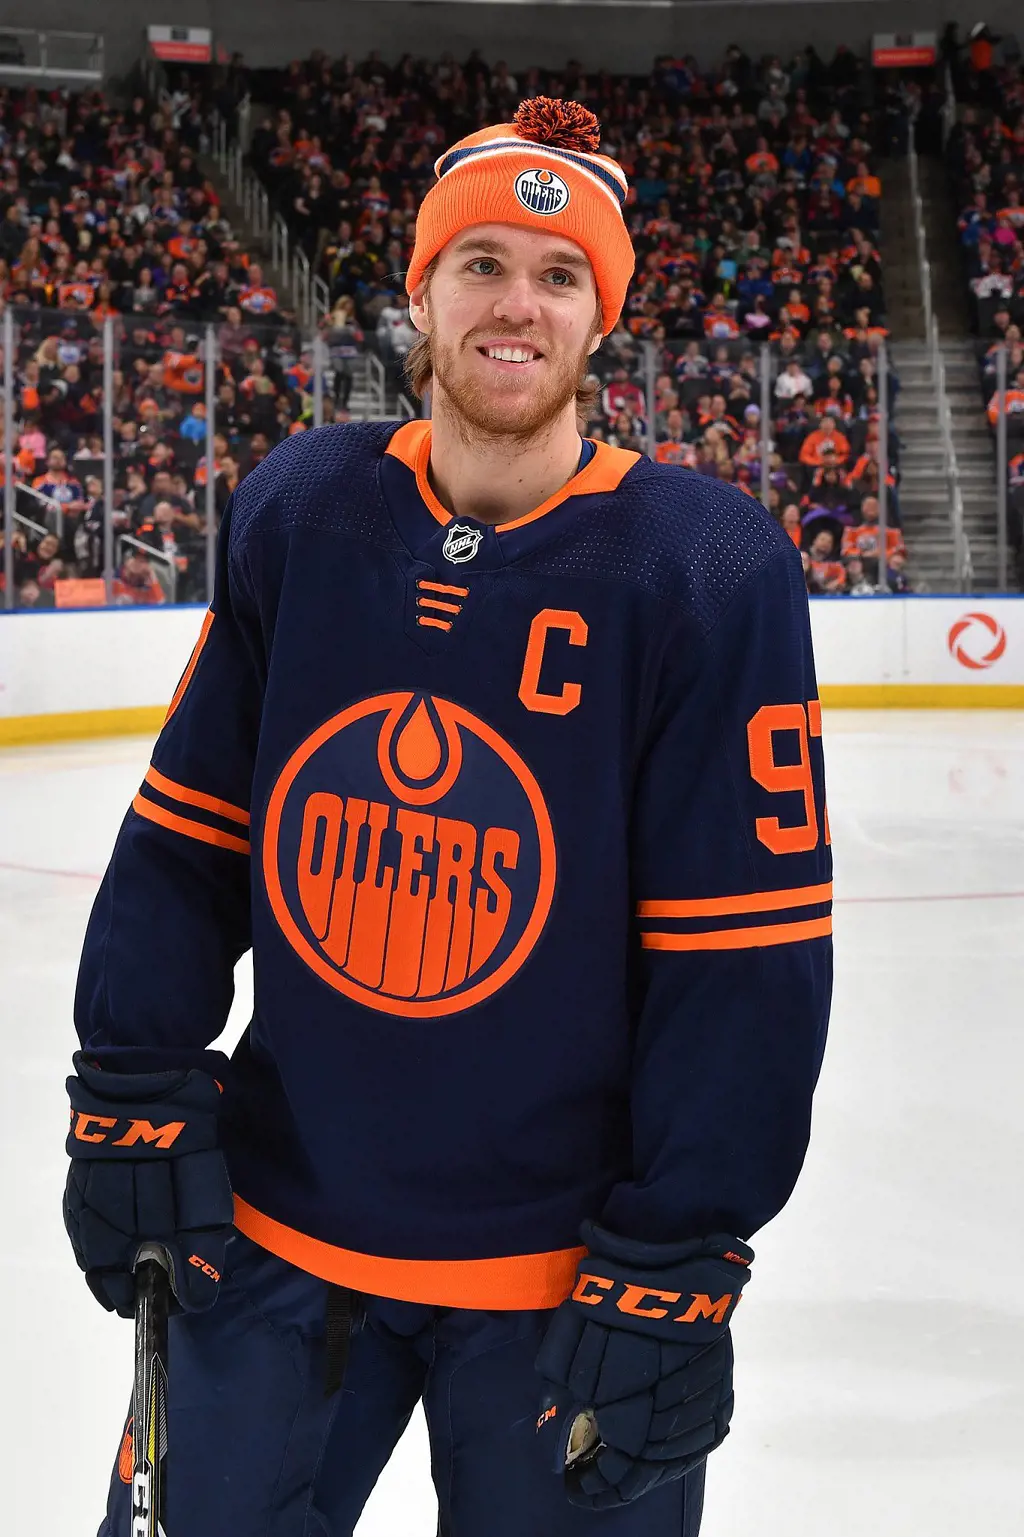 Connor McDavid with Oilers in 2020